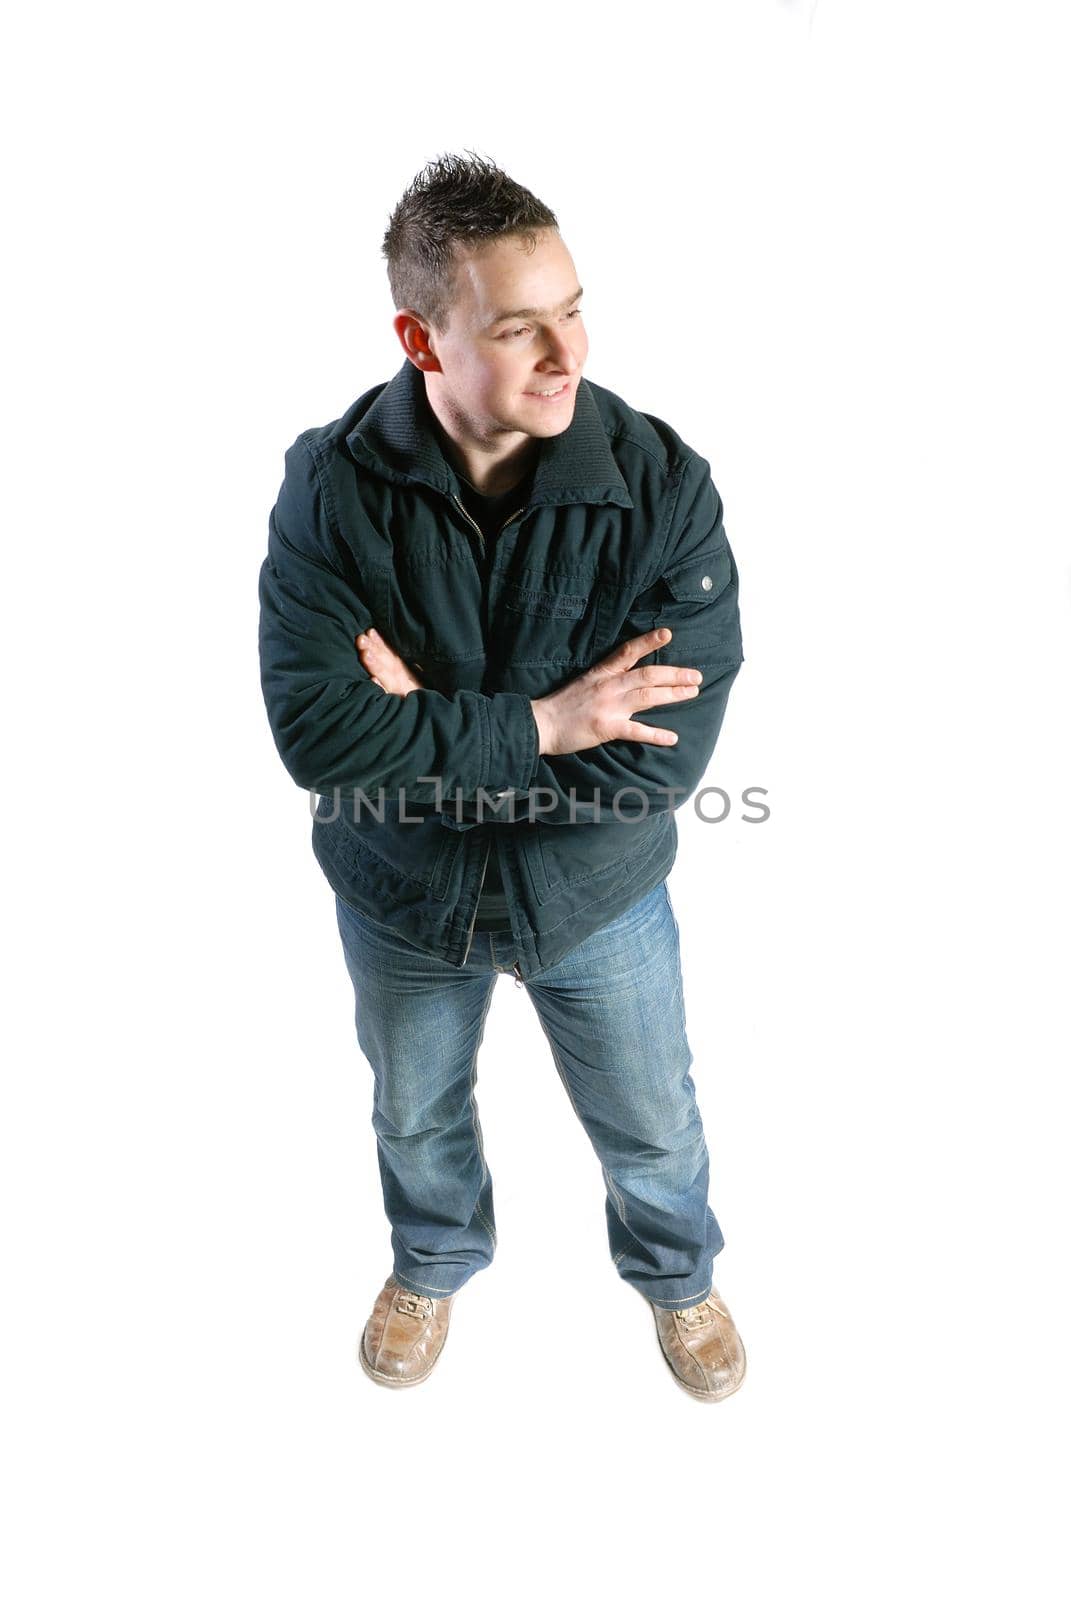 young boy in jacket isolated on white background